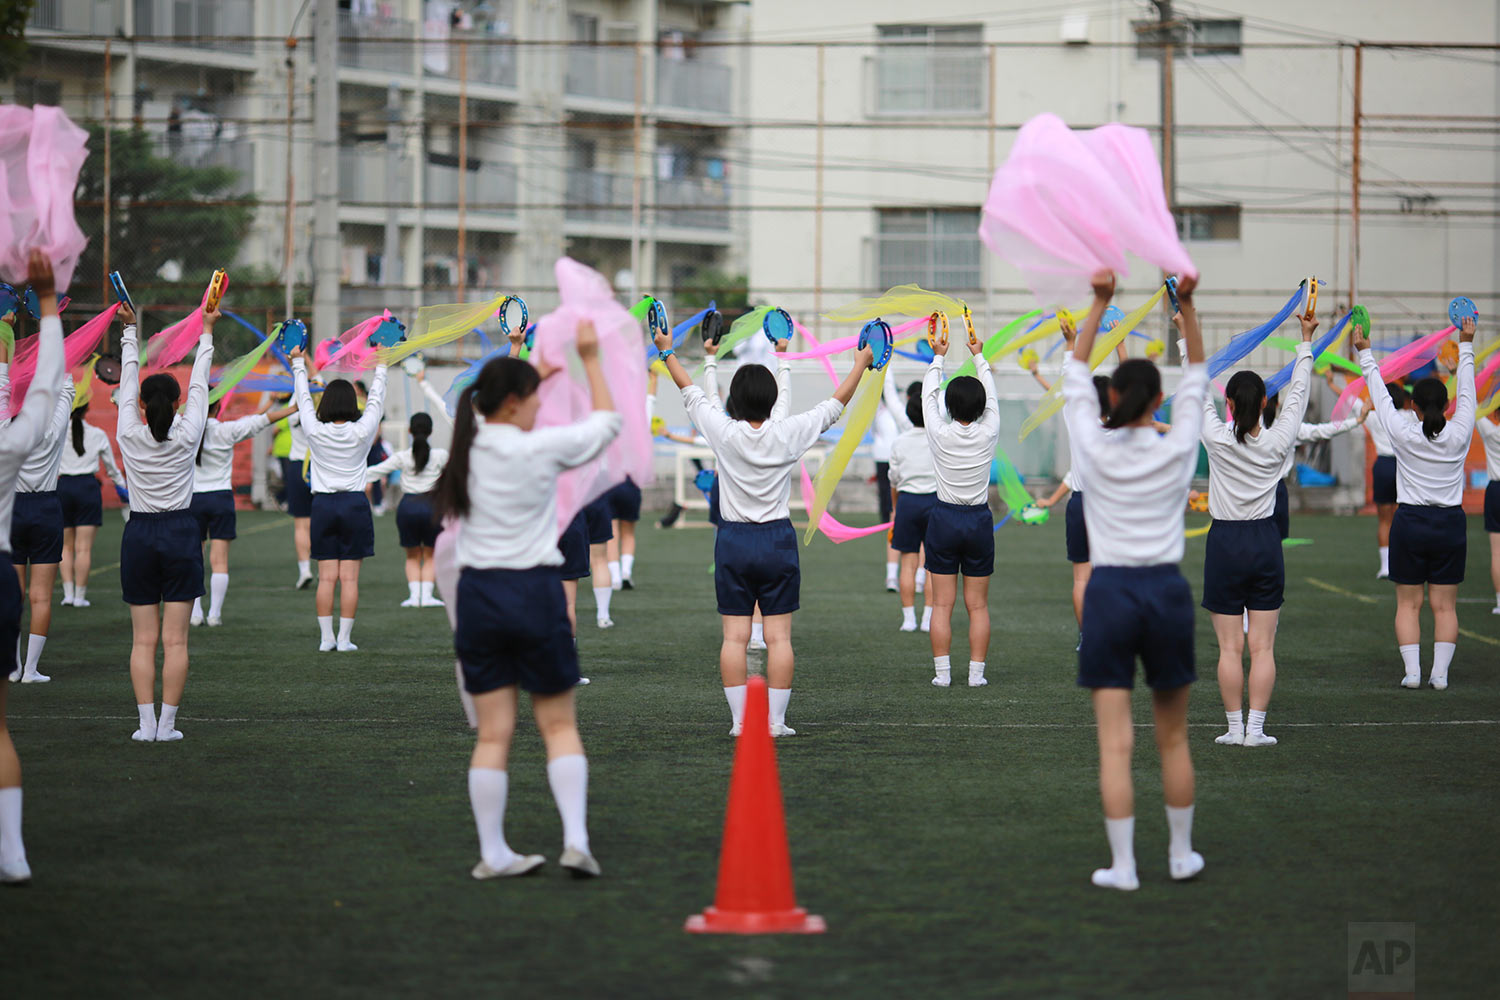  In this Sept. 26, 2017, photo, students practice flag cheering routines at a Korean high school in Tokyo. Many third- and fourth-generation descendants of Koreans brought to Japan during the imperialist years before and during World War II remain lo